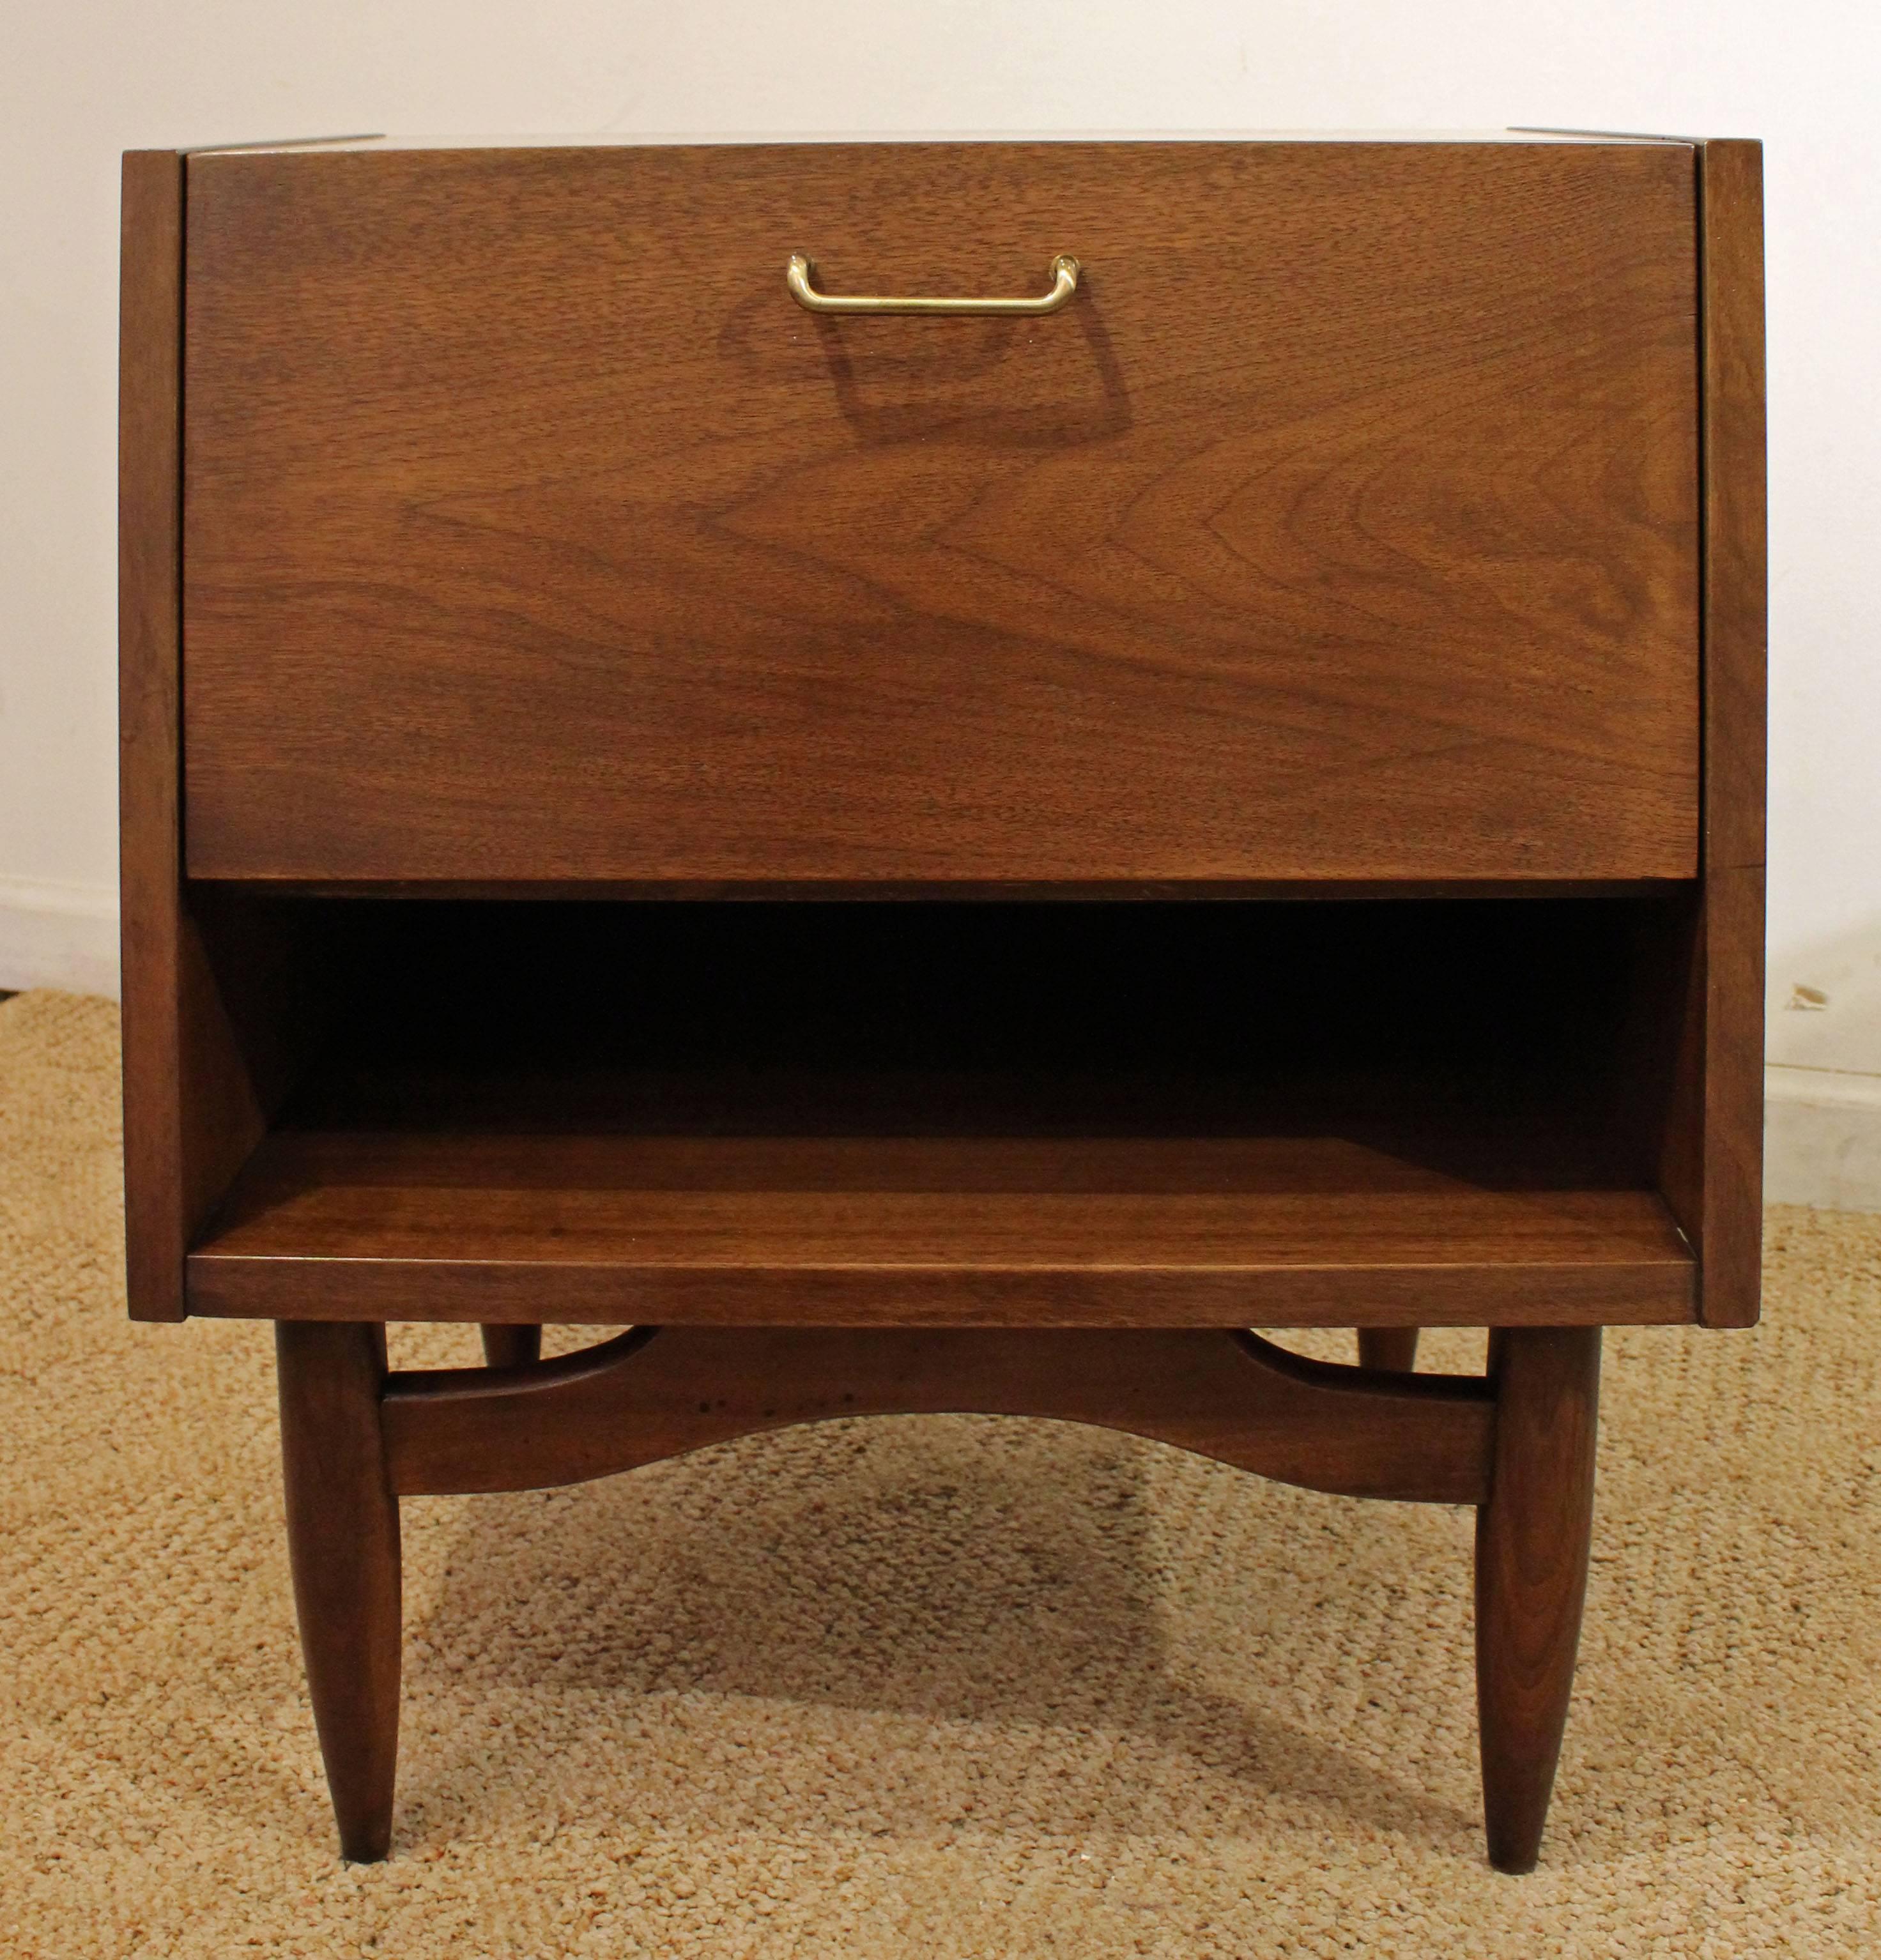 Offered is a walnut nightstand, designed by Merton L. Gershun for American of Martinsville's 